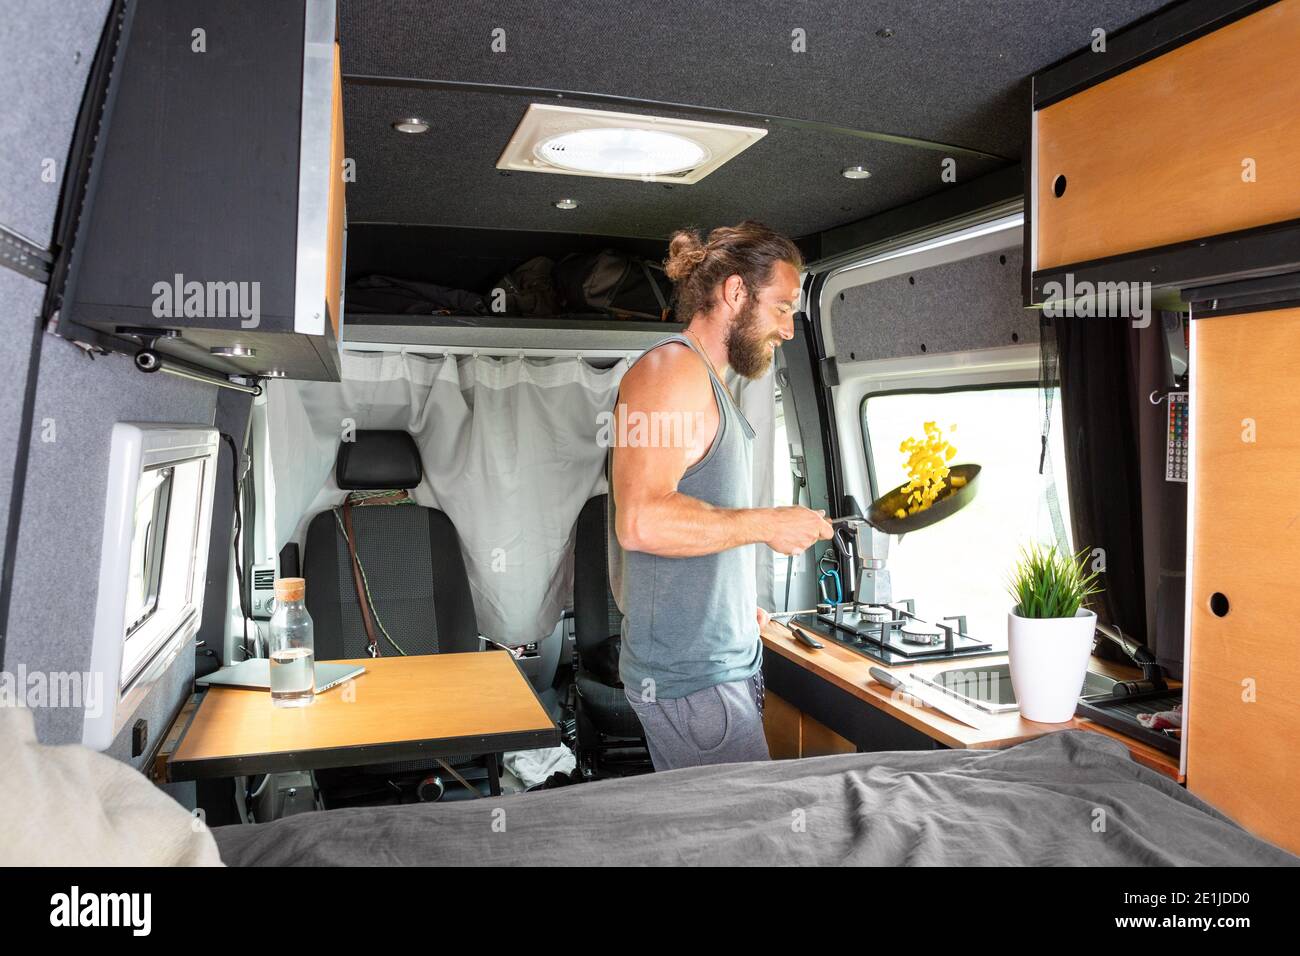 Man inside a camper van is cooking on a gas stove Stock Photo